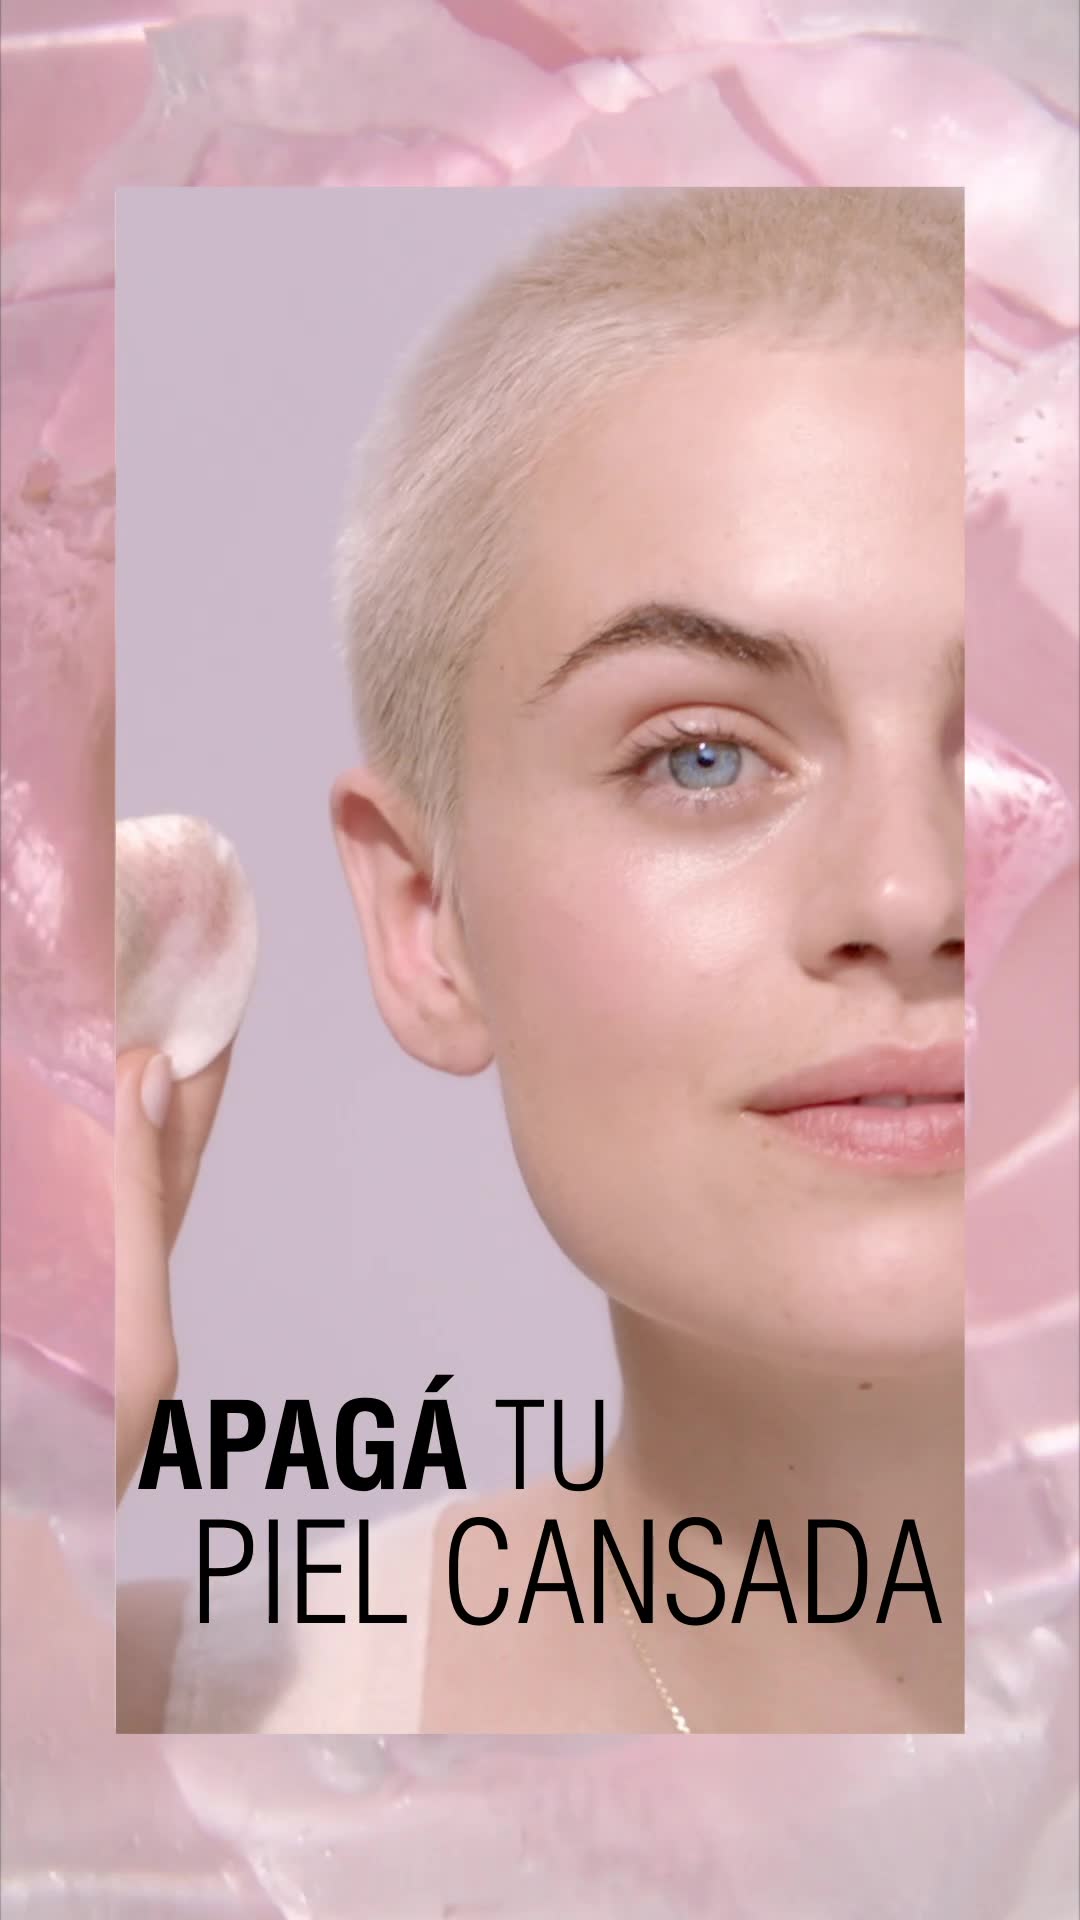 get_the_best_Agua_ad